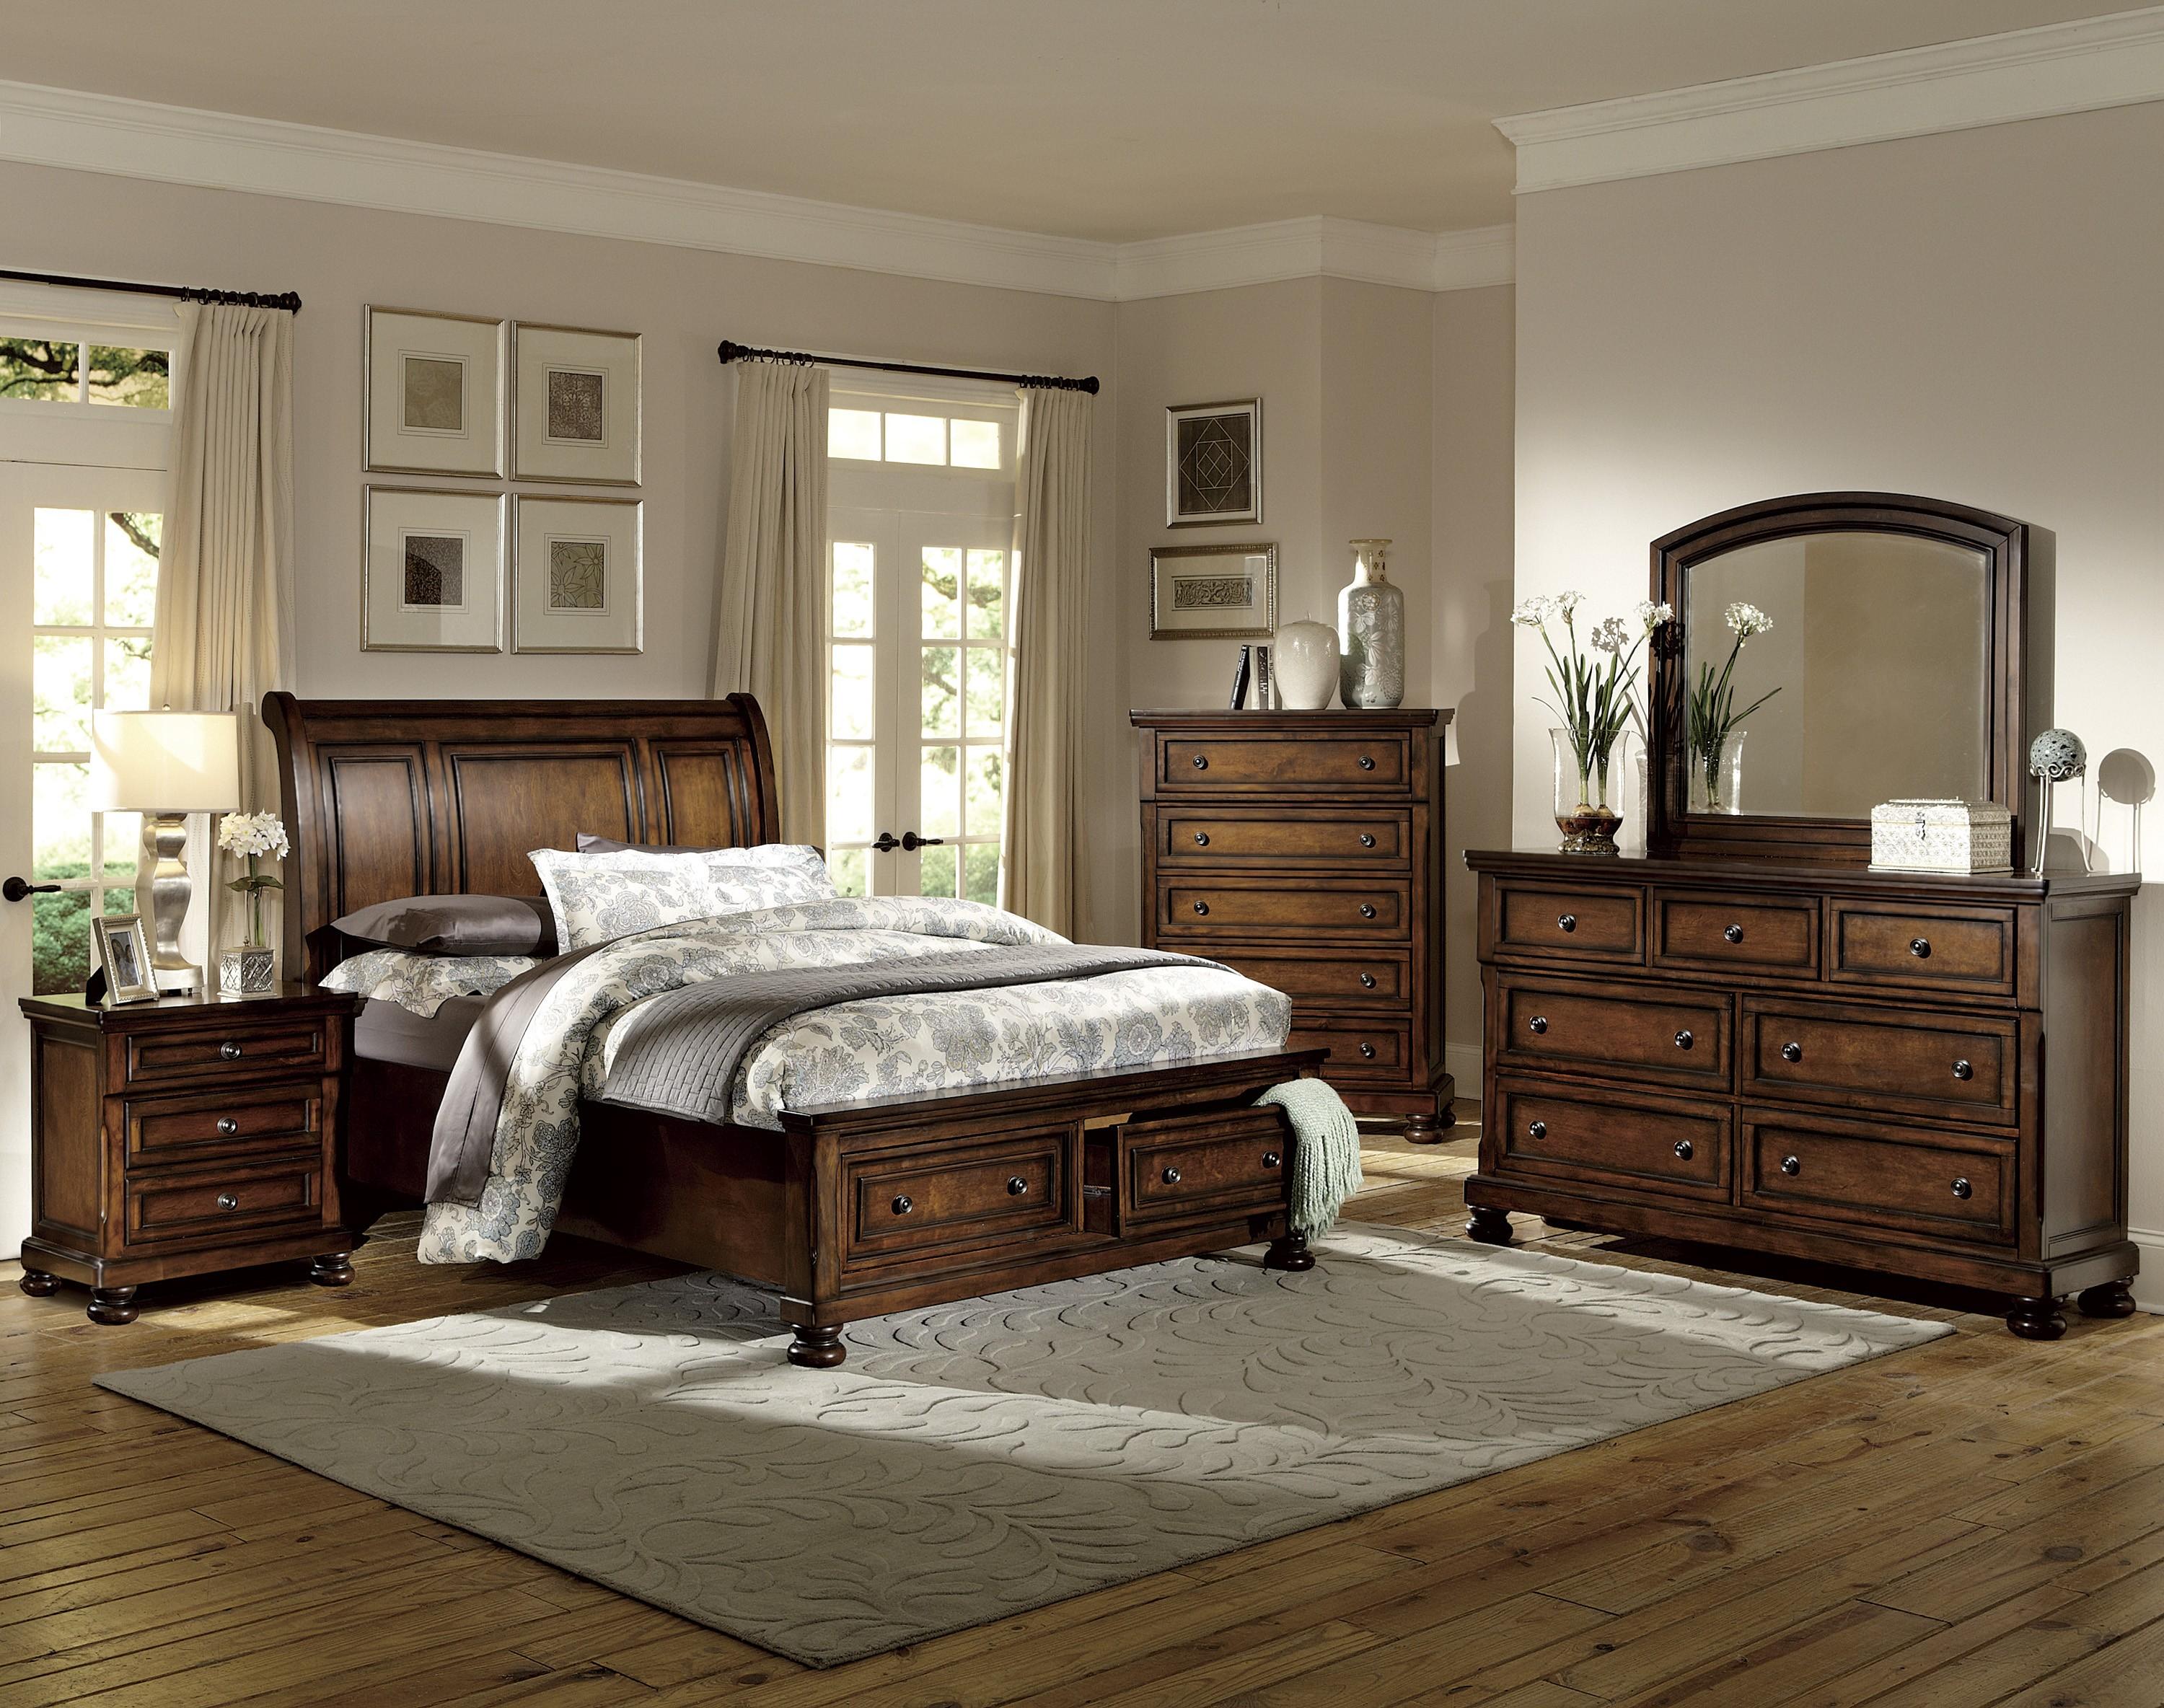 Traditional Bedroom Set 2159F-1-6PC Cumberland 2159F-1-6PC in Cherry 